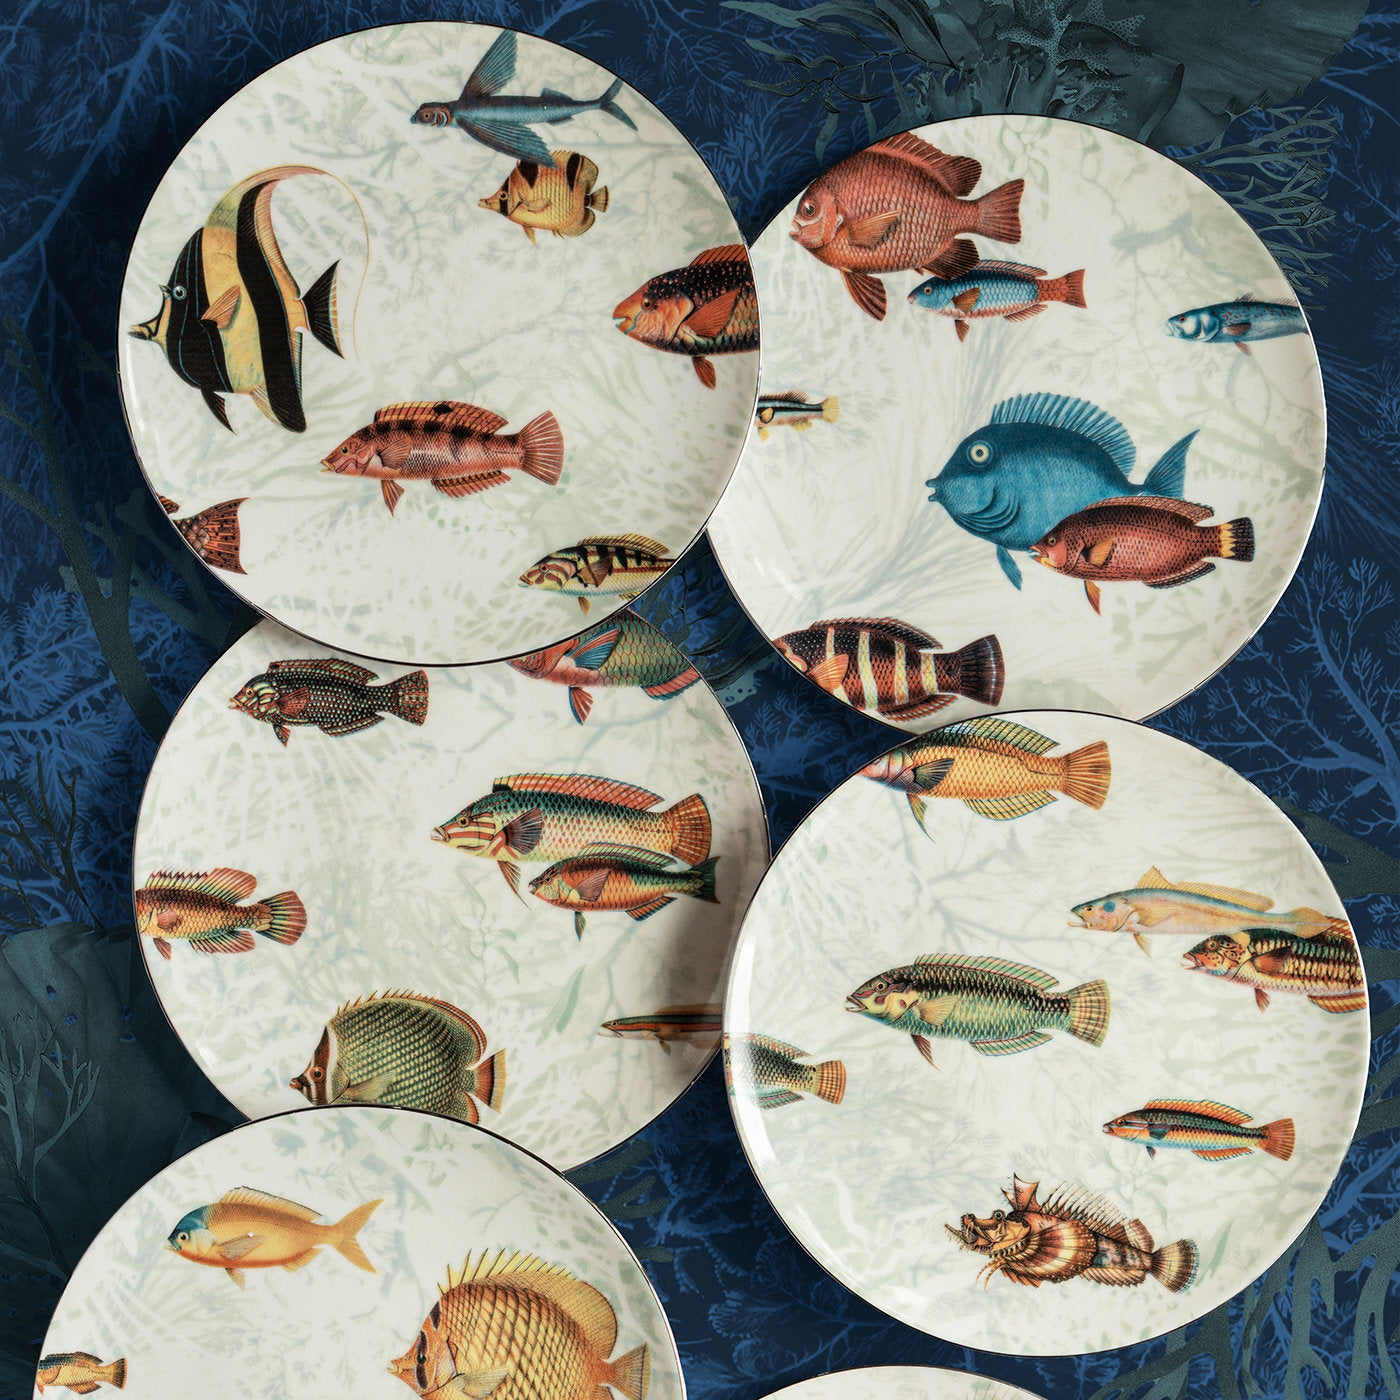 Amami Set Of 2 Porcelain Dessert Plates With Tropical Fish #1 - Alternative view 1